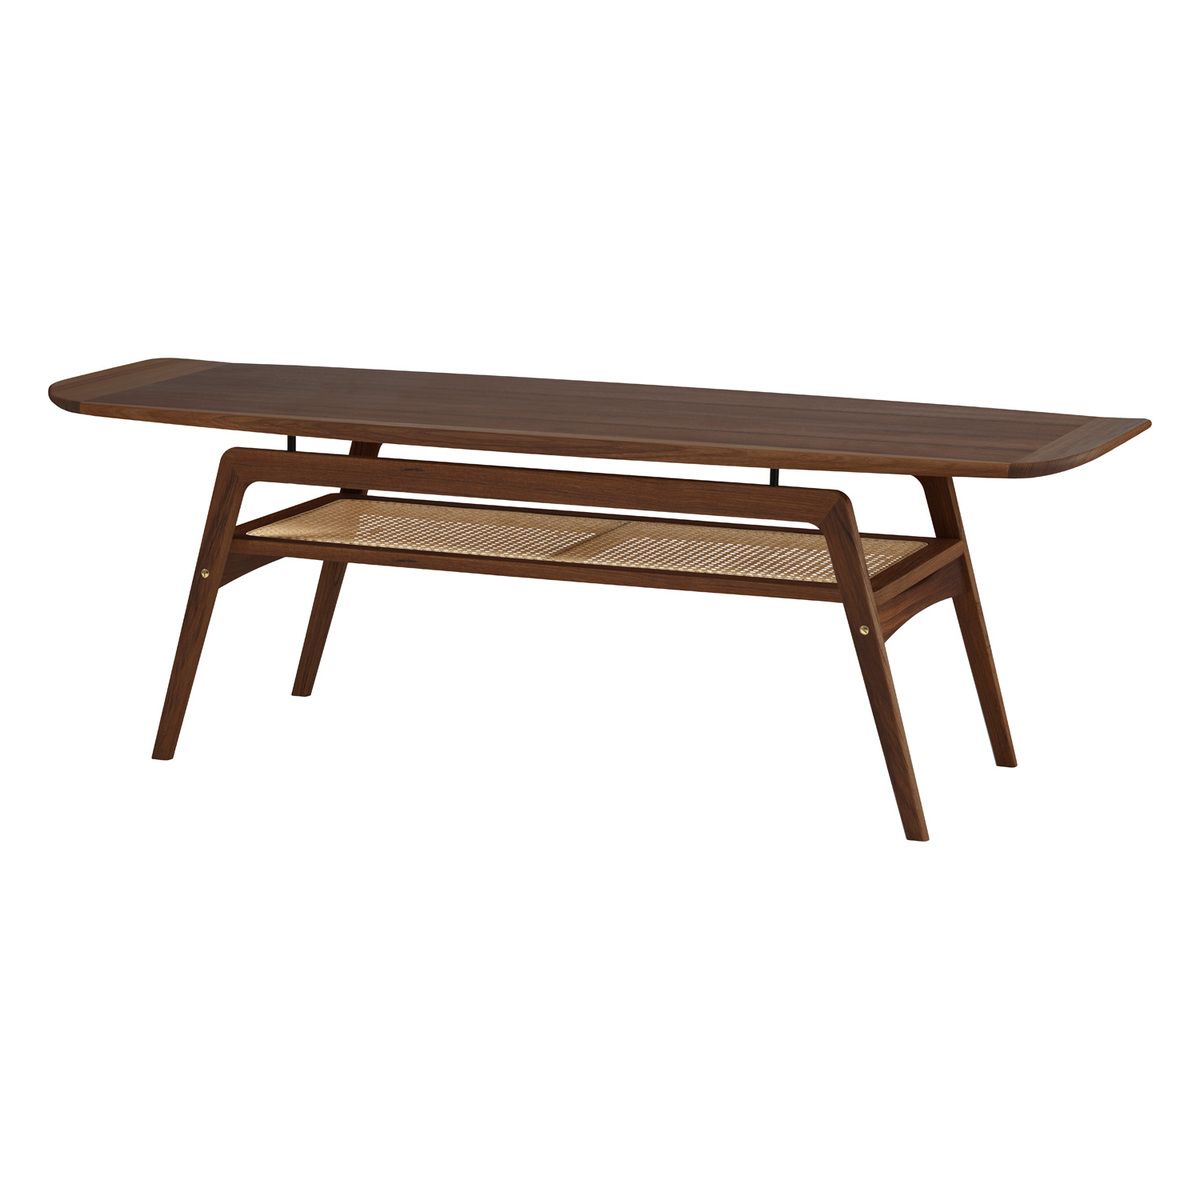 Surfboard Coffee Table With Shelf, Walnut – French Cane (View 5 of 20)